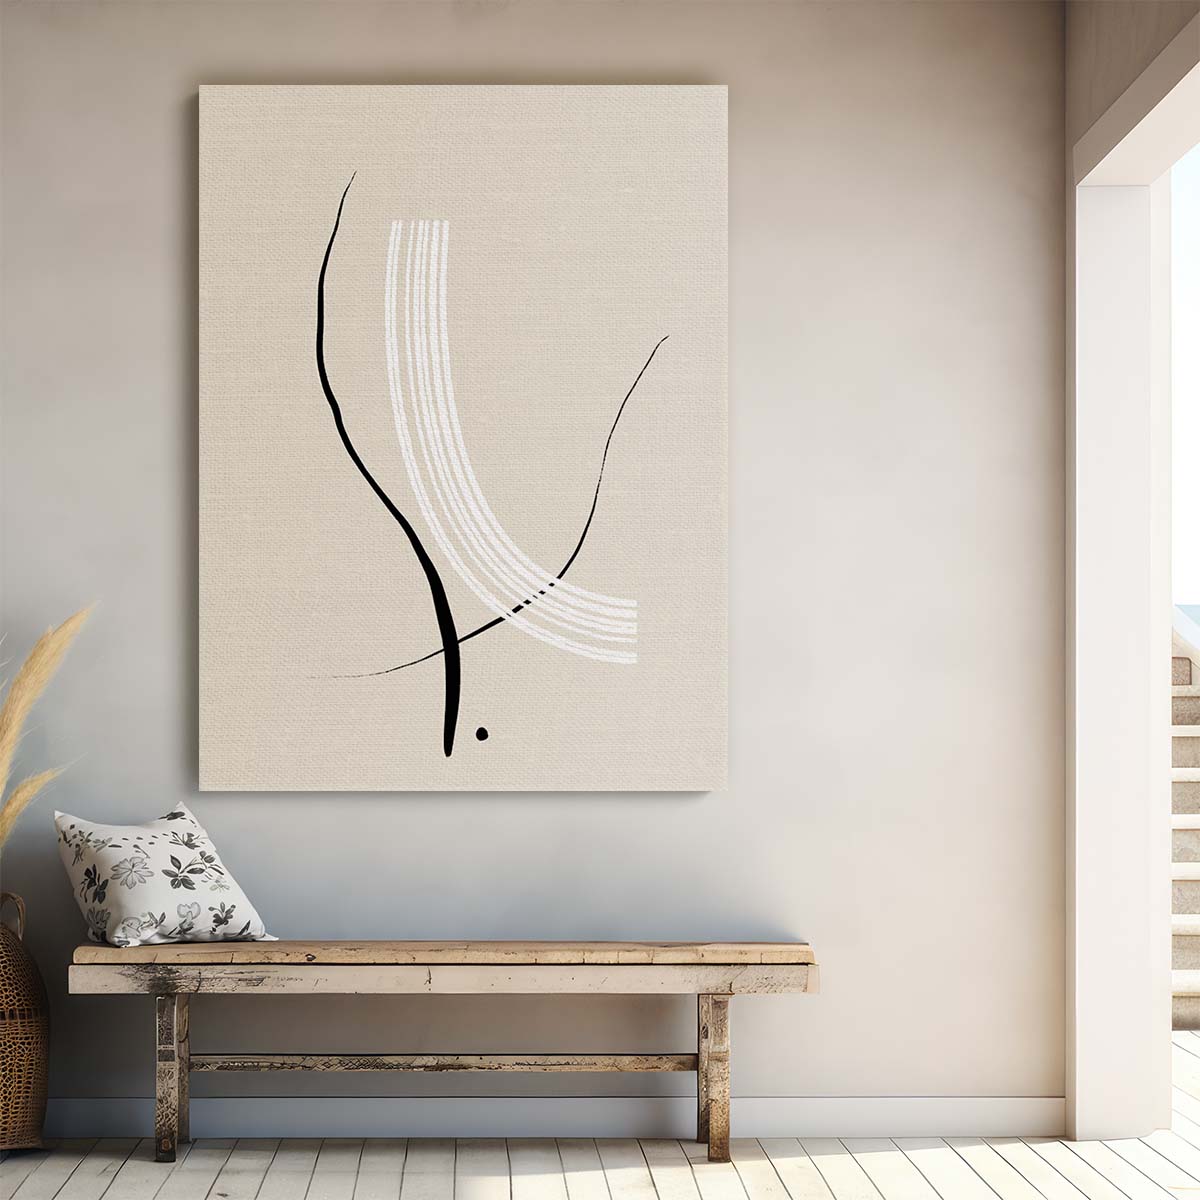 Beige Abstract Shapes Illustration Wall Art by Uplusmestudio by Luxuriance Designs, made in USA